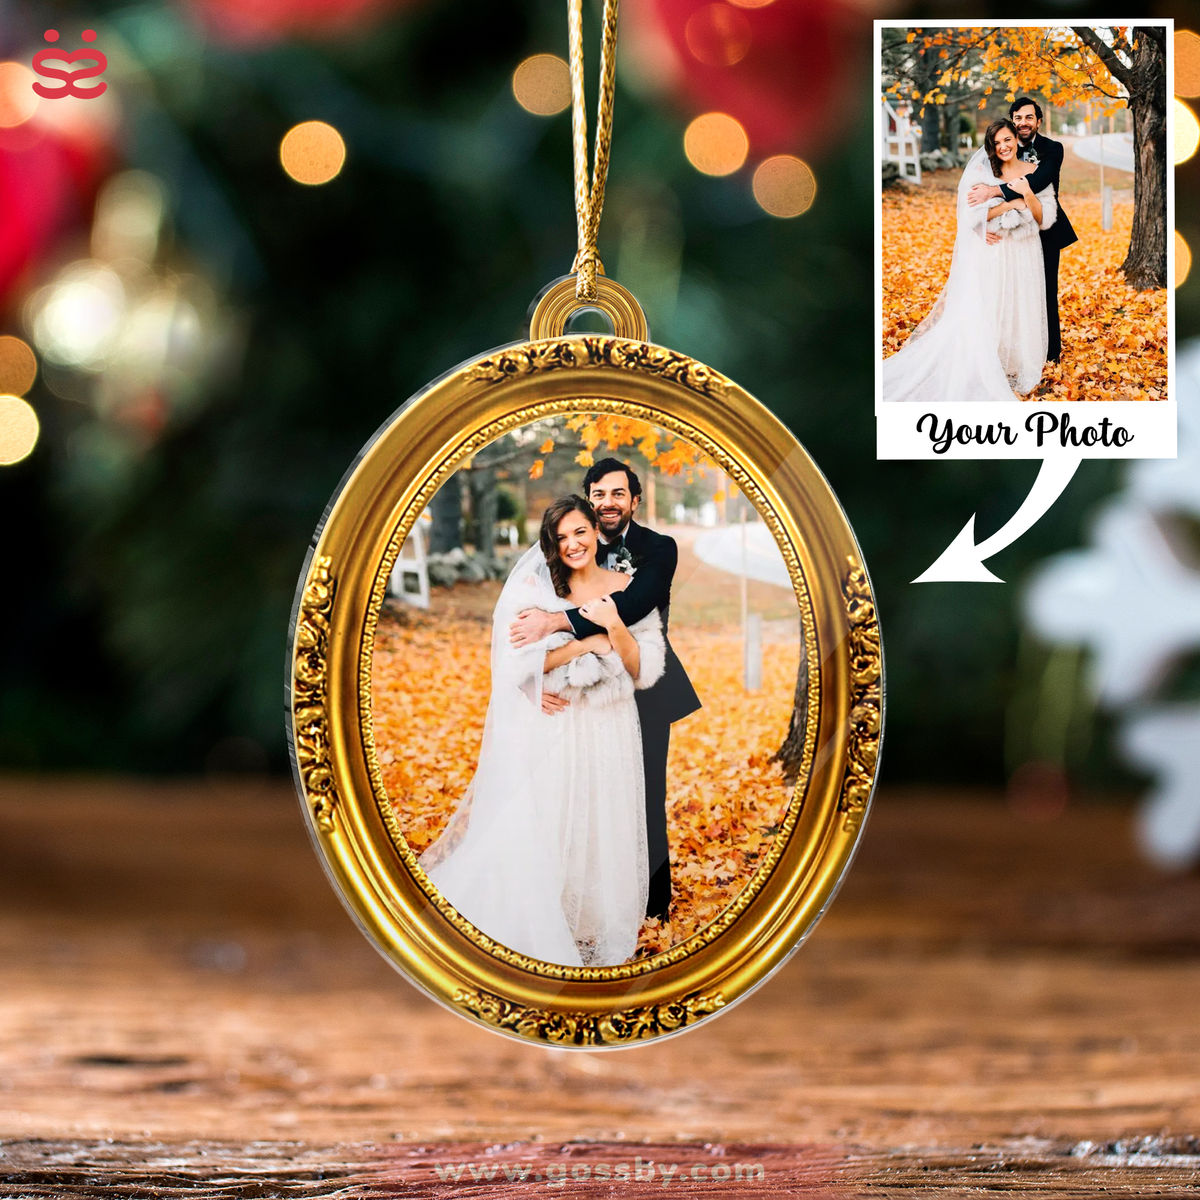 Xmas Ornament - Photo Frame Keepsake Ornament - Customized Your Photo Ornaments - Couple Photo Gifts, Christmas Gifts for Couple